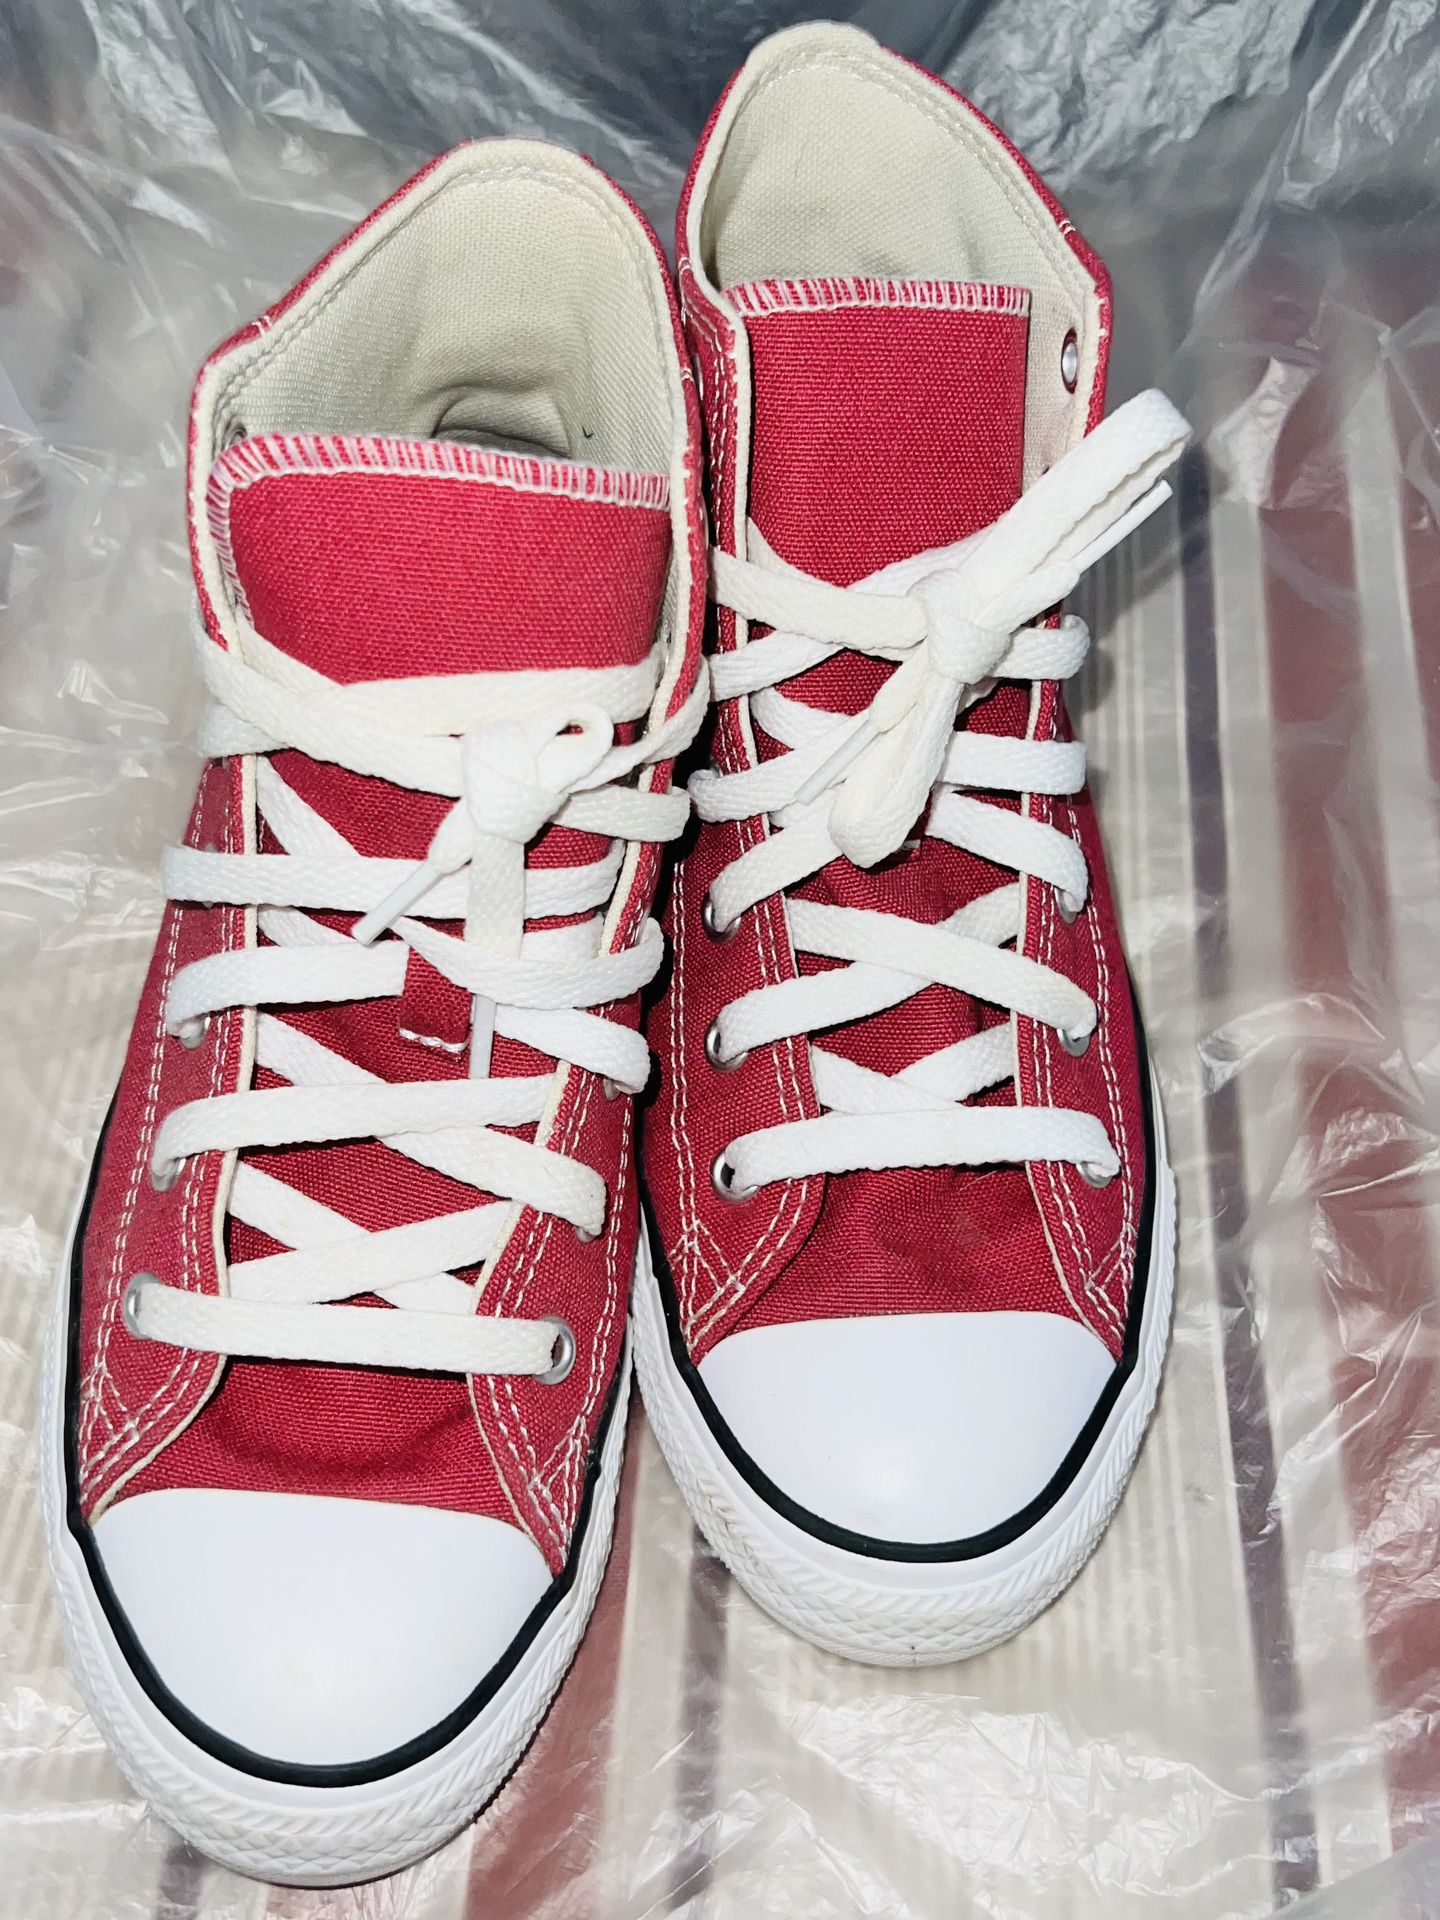 very nice converse All star shoes size (3) fix (6) only $25 firm 